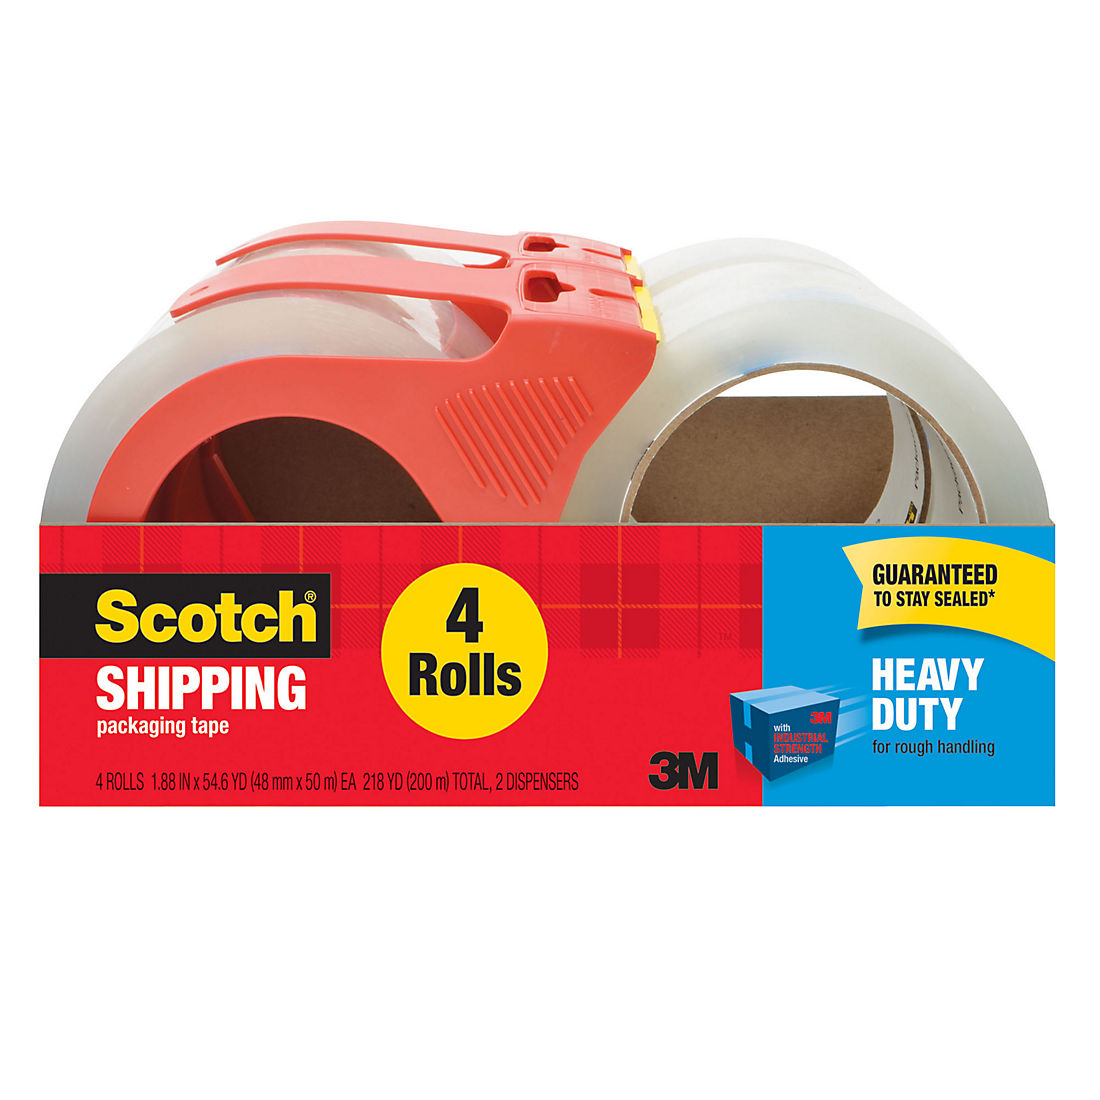 Scotch Heavy Duty Shipping Packaging Tape with Dispenser